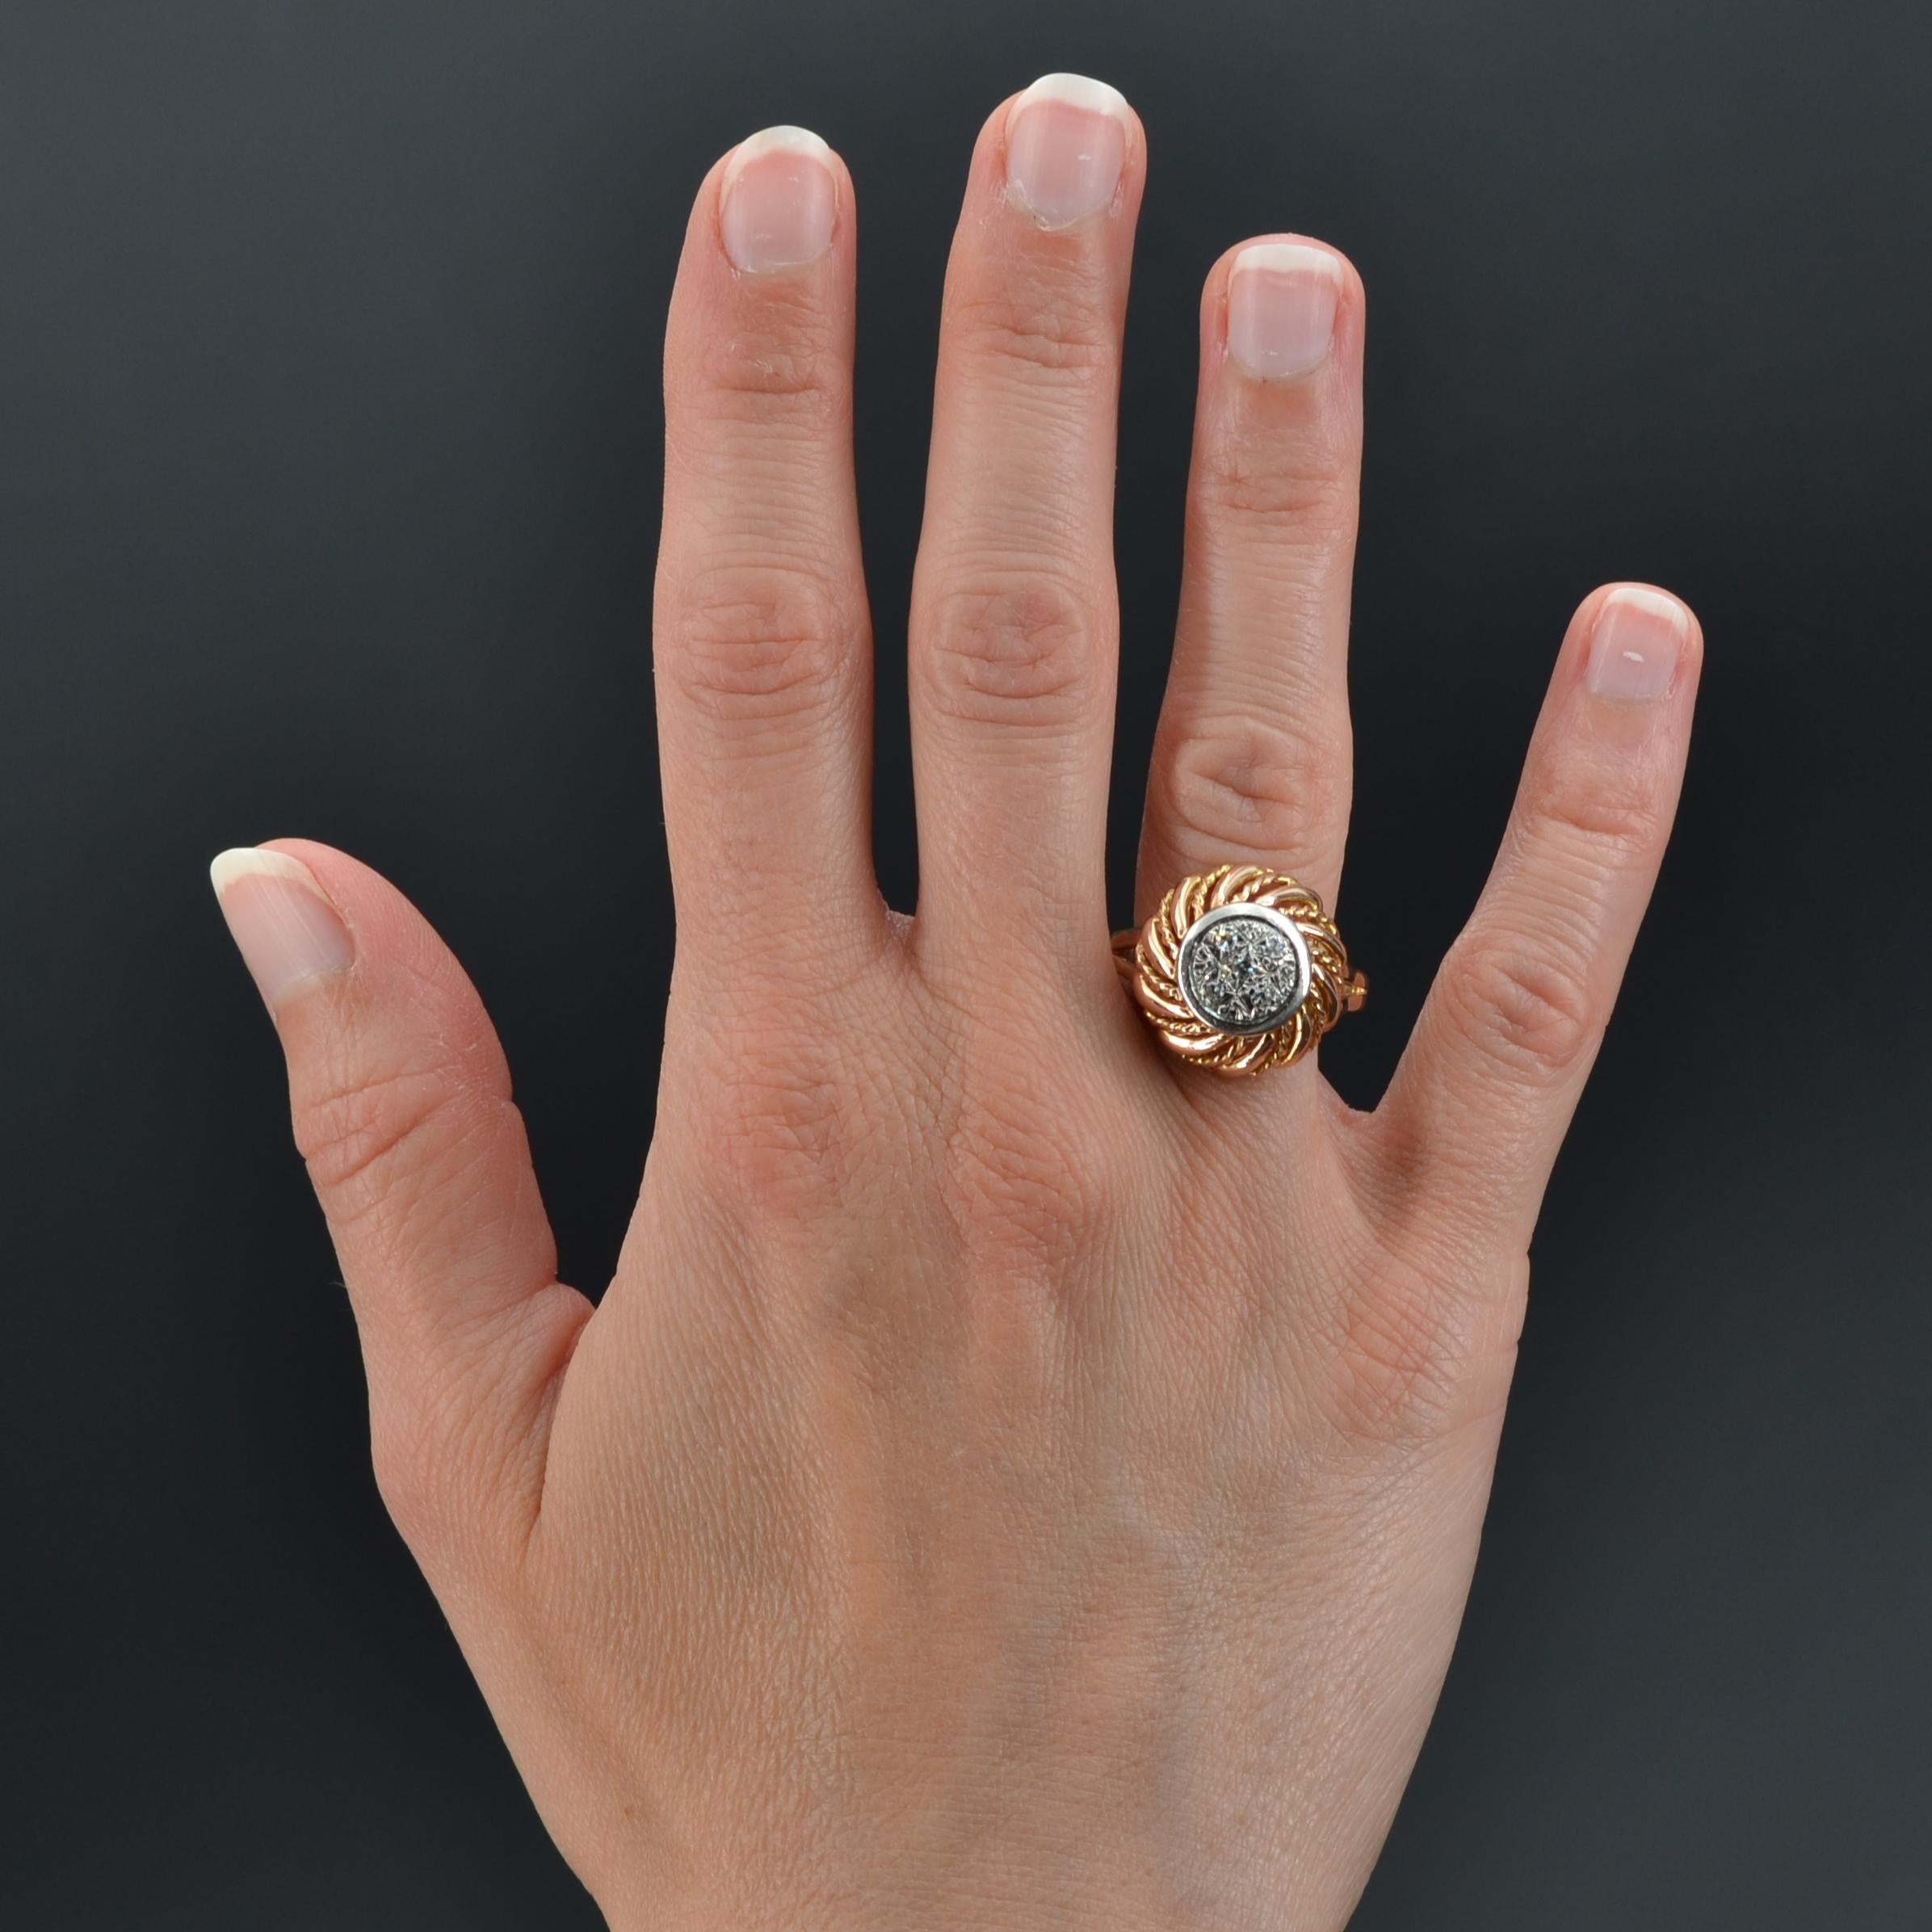 Ring in 18 karat rose gold, eagle head hallmark.
Charming retro ring, it is decorated on its top with a set of 5 diamonds in a round pattern within an openwork decoration of alternating twists to the base.
Total weight of the diamonds : 0.16 carat